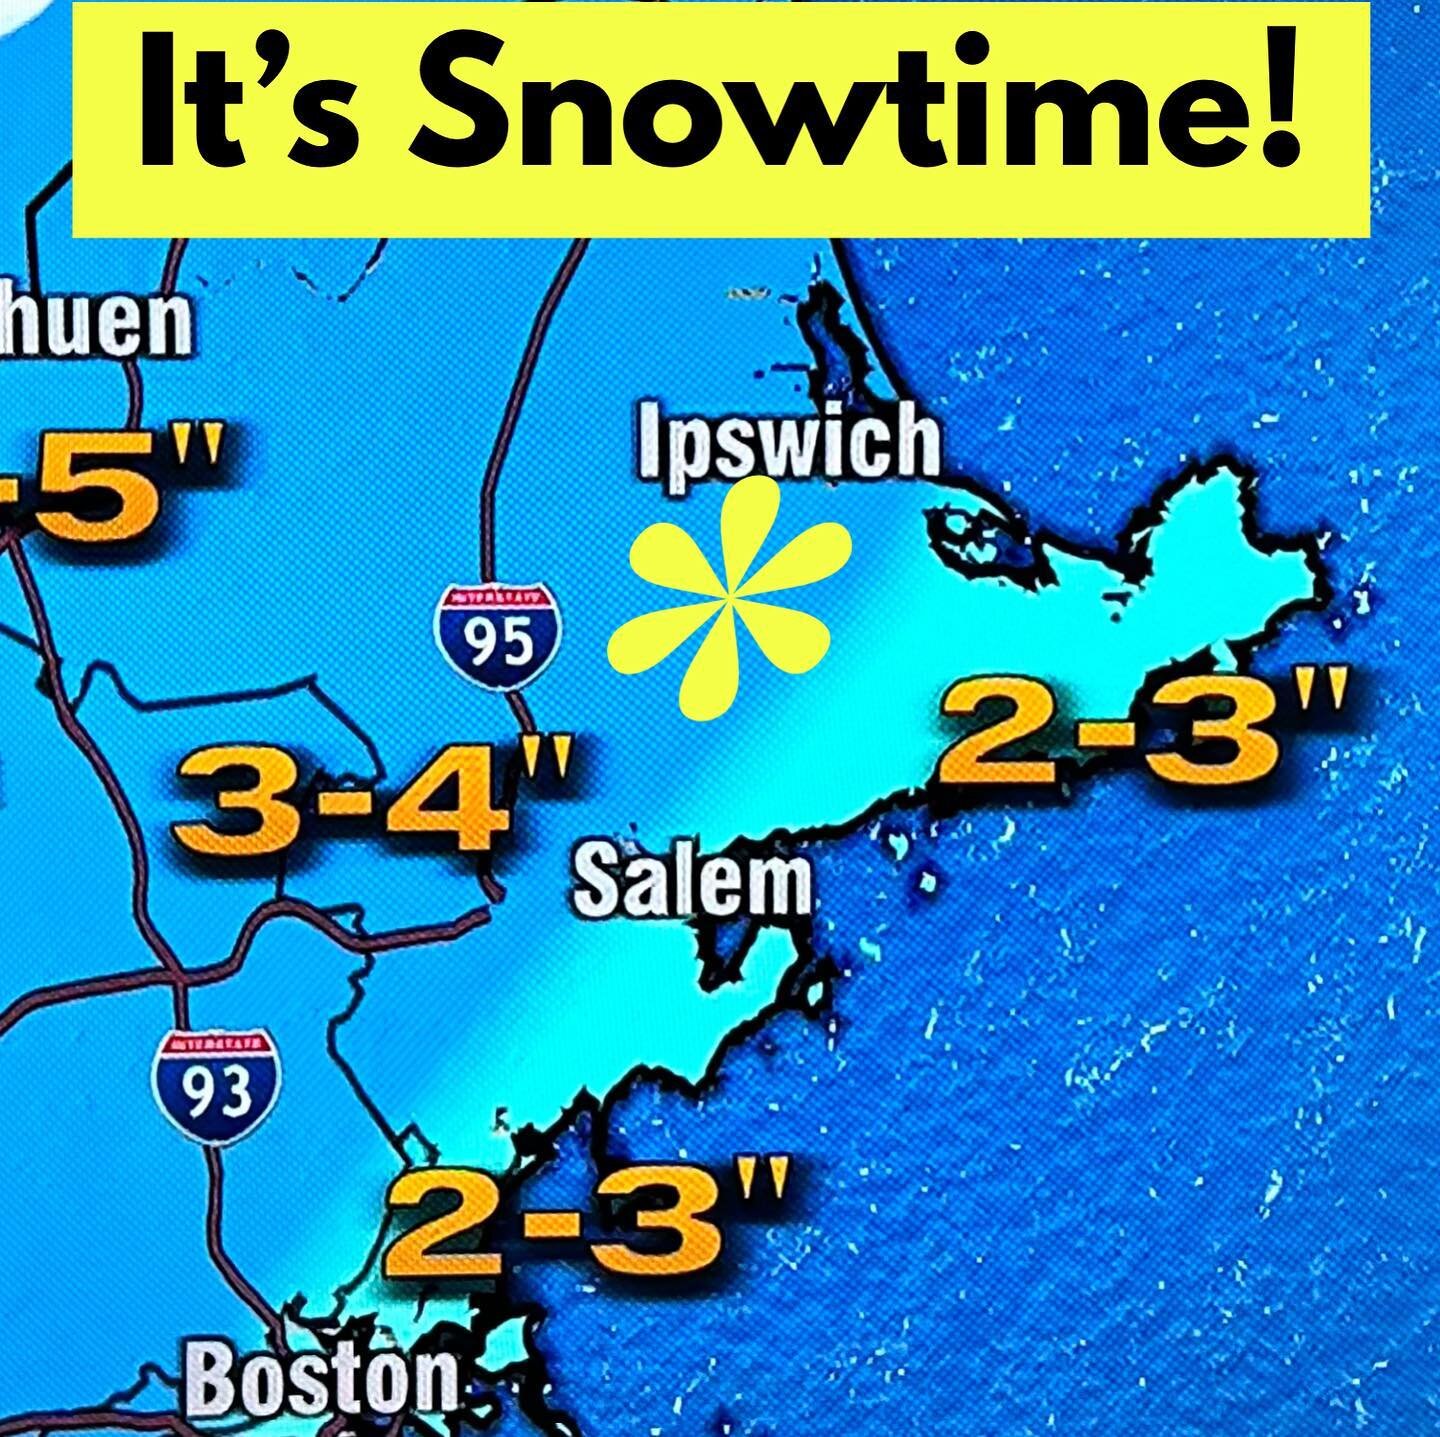 Well, Jim Cantore hasn&rsquo;t shown up in Ipswich yet, but our favorite media outlets are forecasting groomable amounts of snow for our favorite local ski area! ❄️⛷️❄️⛷️❄️⛷️❄️ depending on whether rain caps off this storm, grooming will likely be la